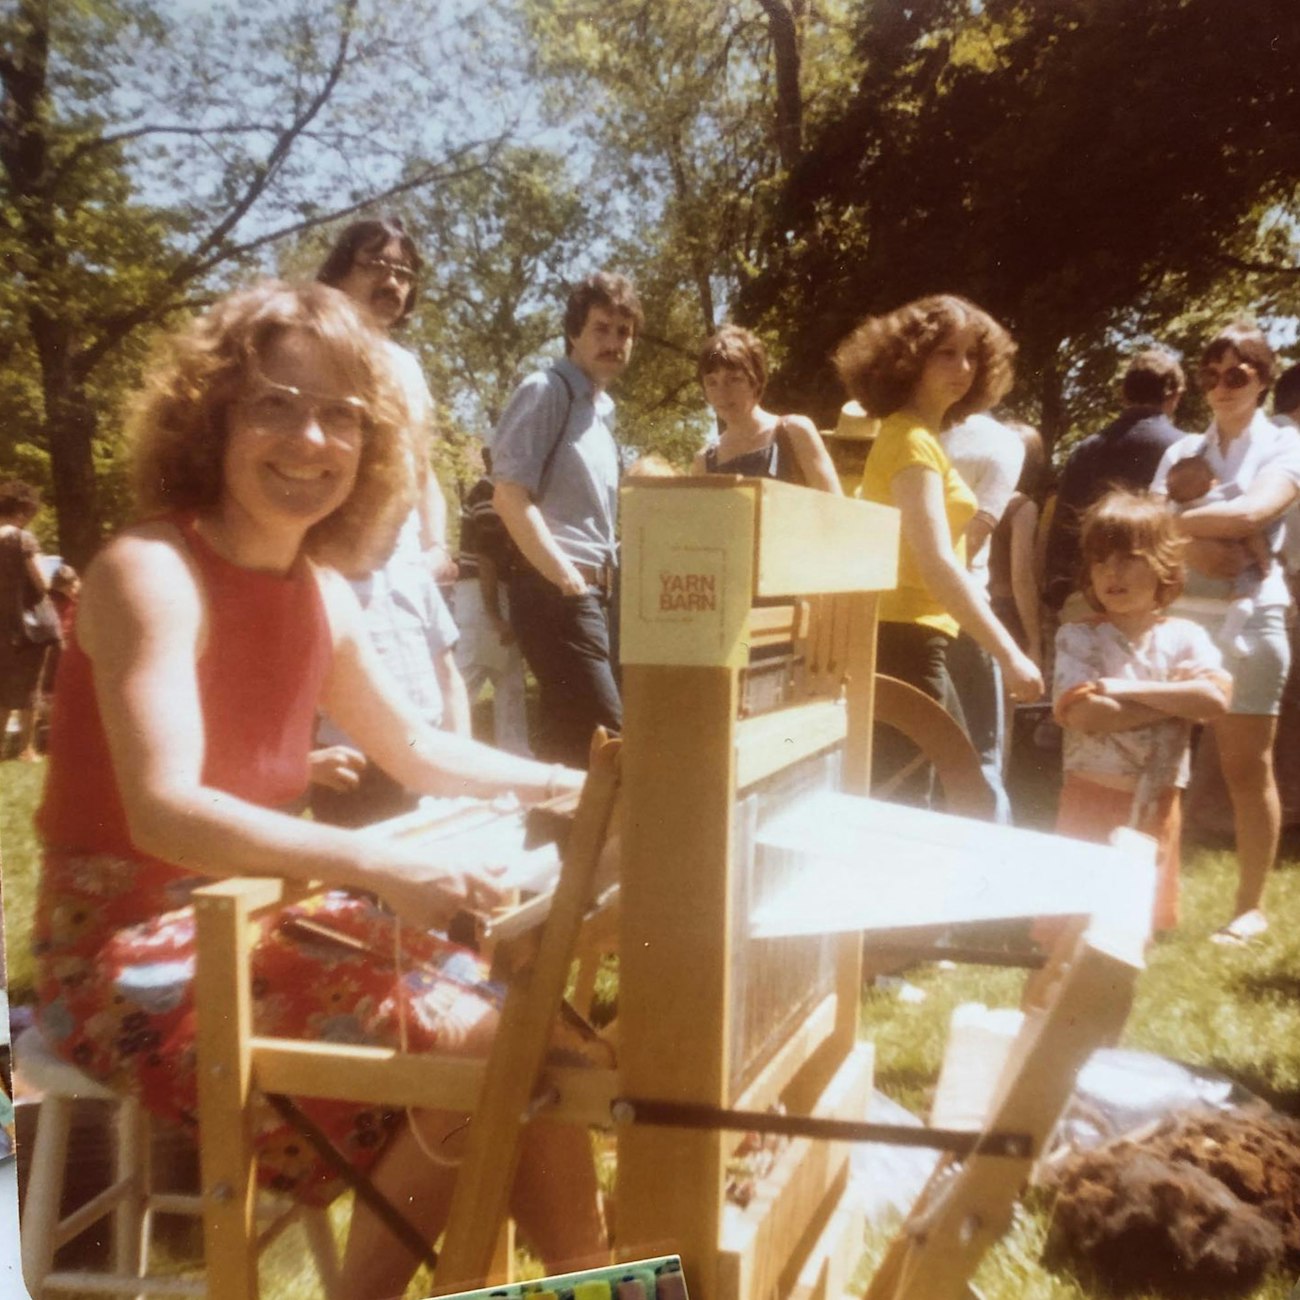 Woman in 1980s attire sitting at loom outside, smiling